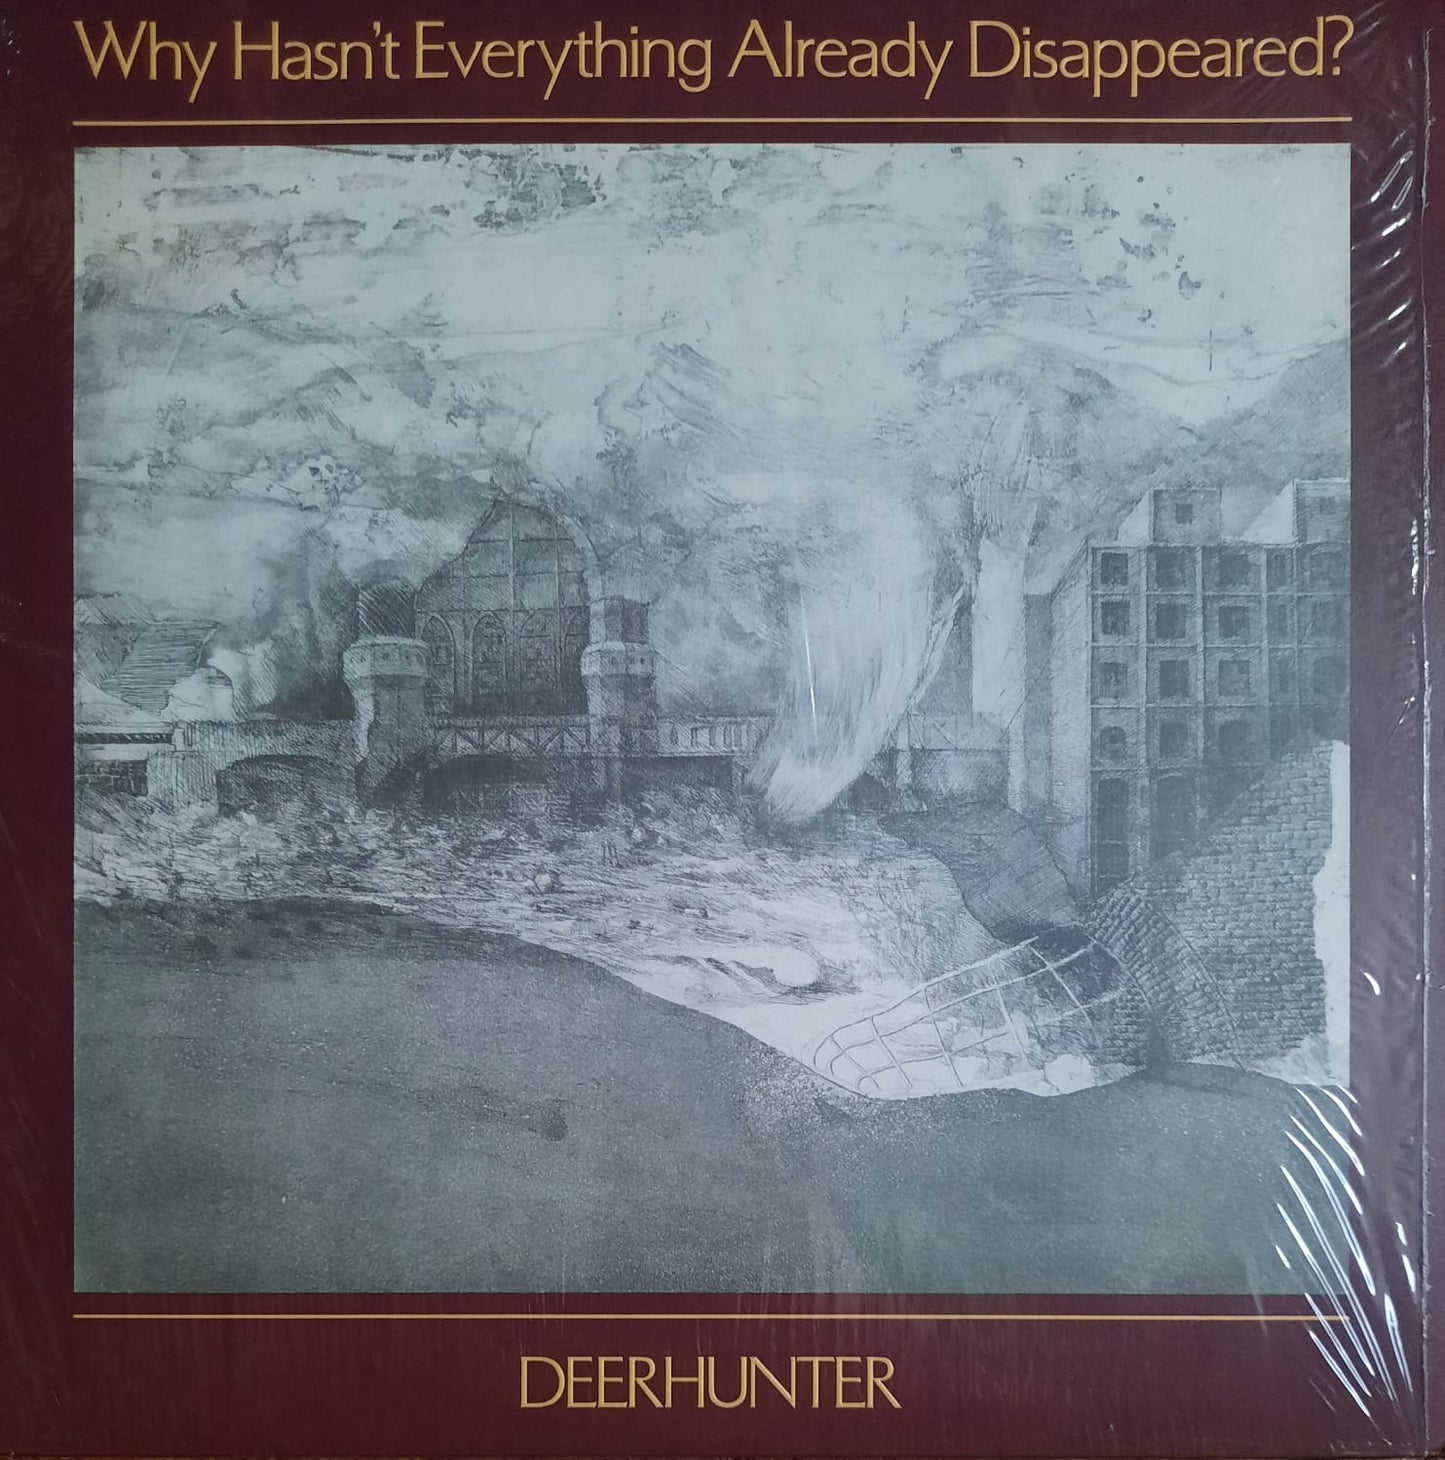 Deerhunter - Why Hasn't Everything Already Disappeared? (LP, Reino Unido, 2019)